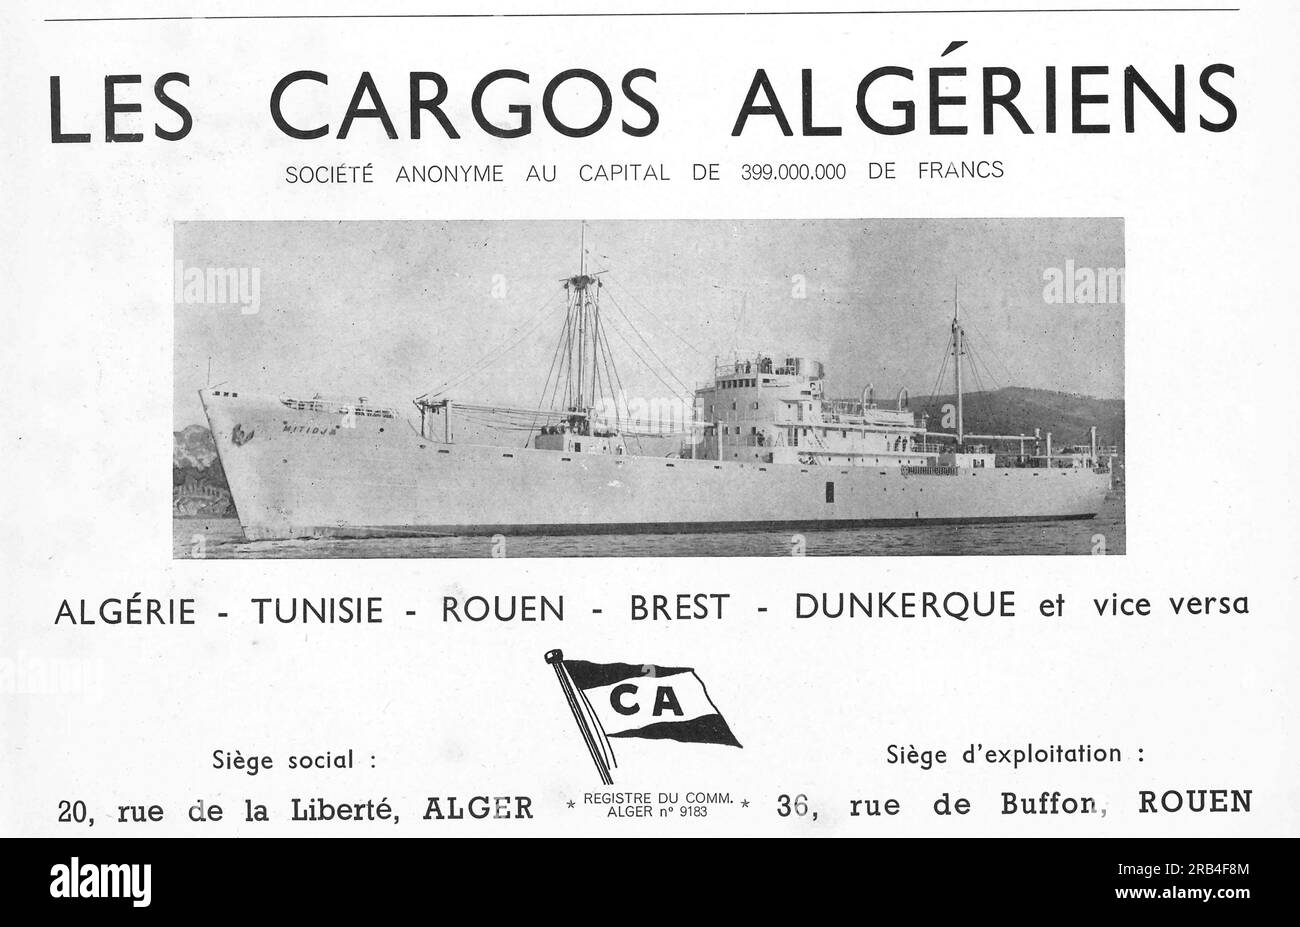 Algerian cargo ships advertisiment in a French magazine 1950 Stock Photo